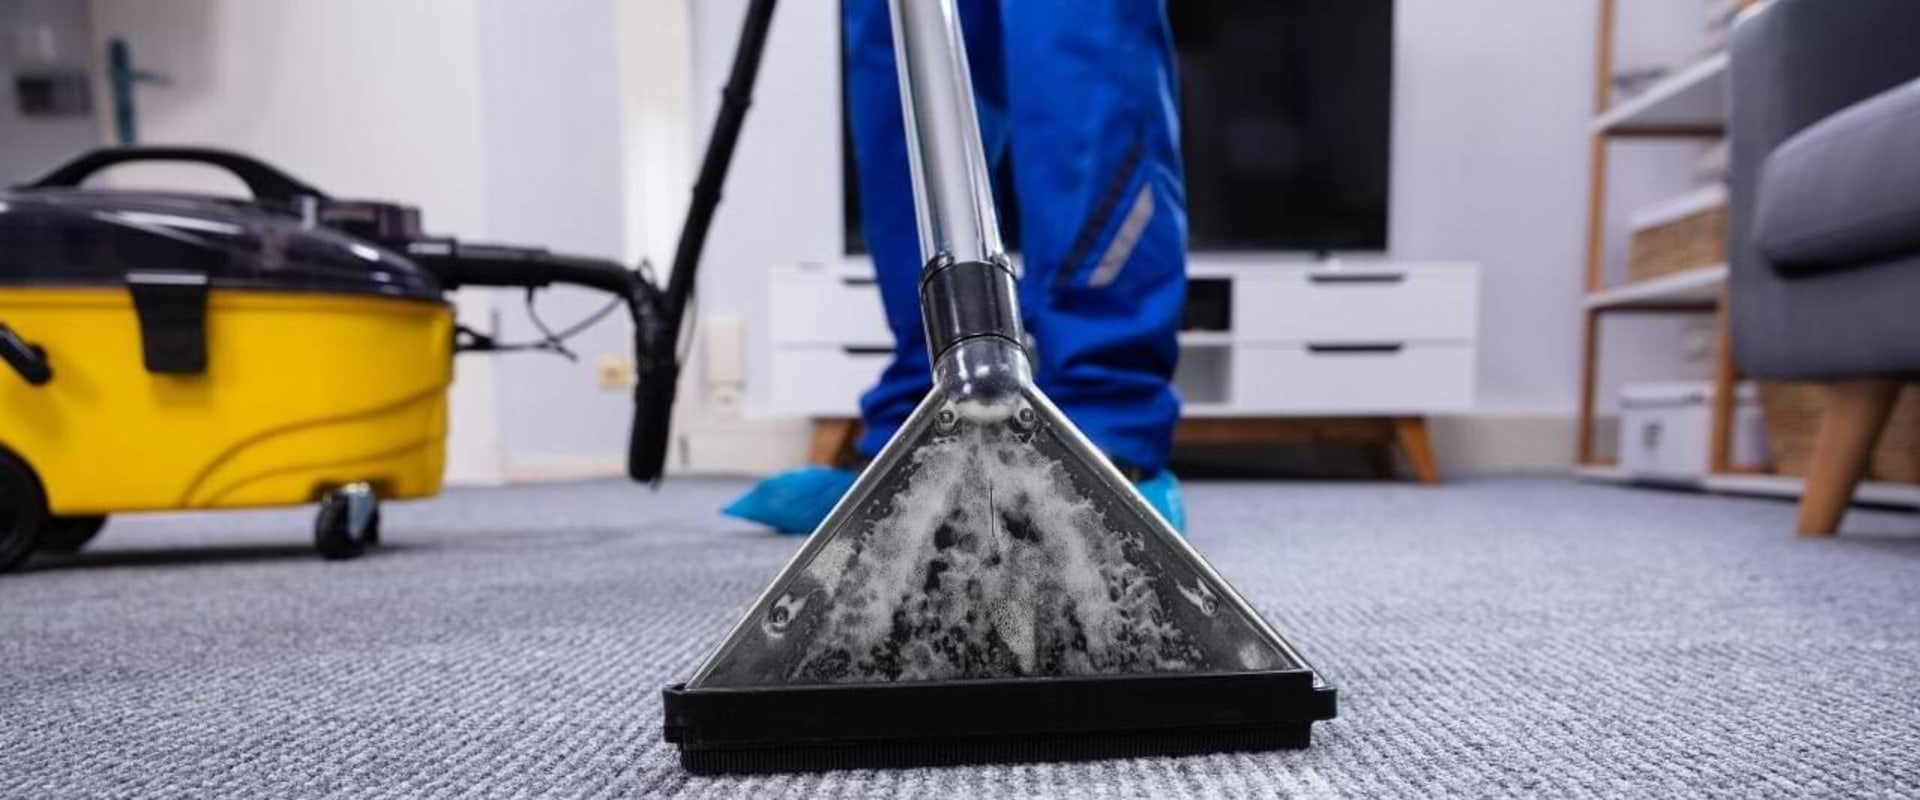 What's the best commercial carpet cleaner to buy?